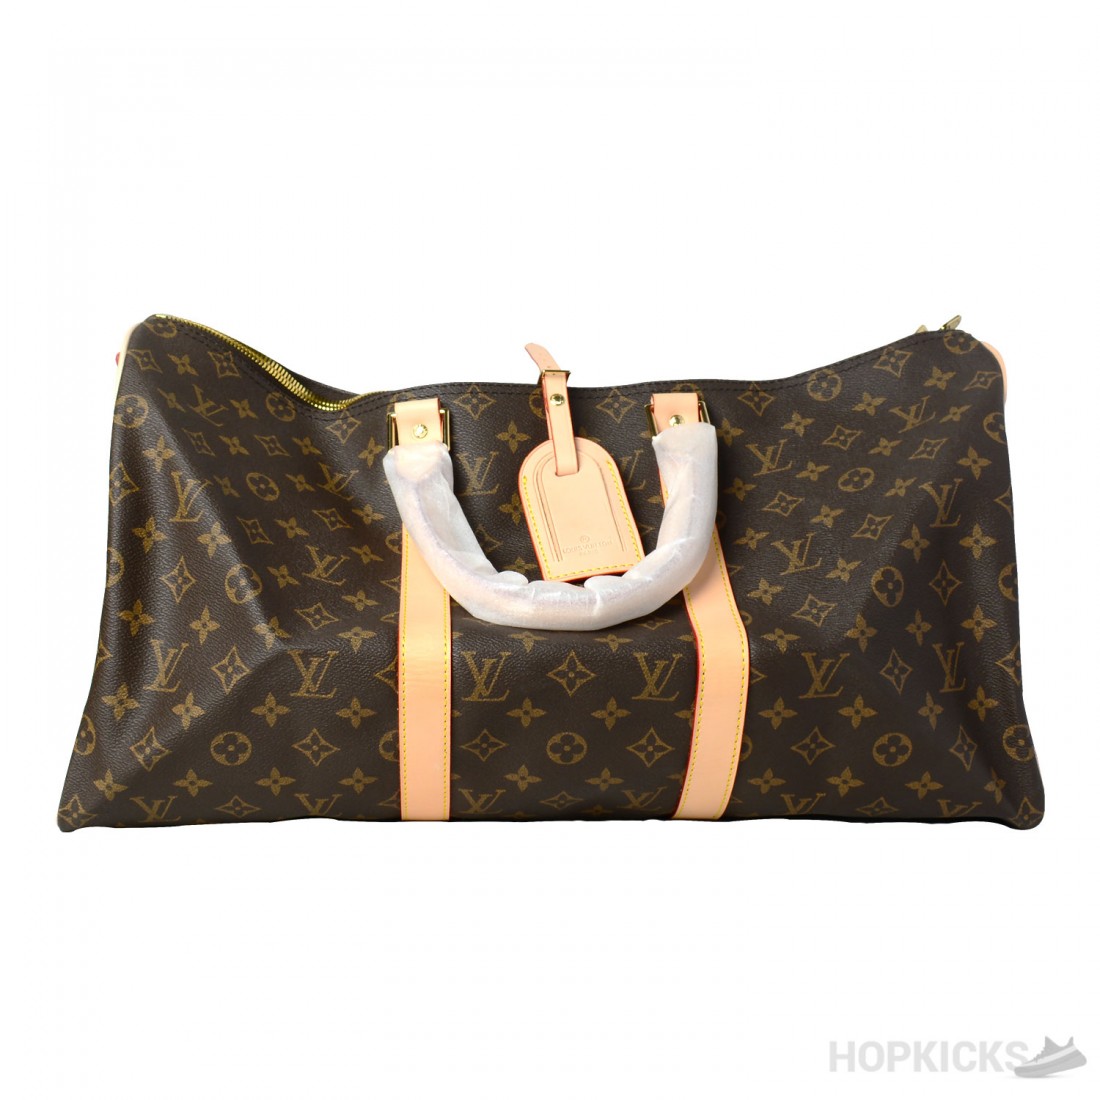 Buy online Lv On The Go Brown In Pakistan, Rs 8500